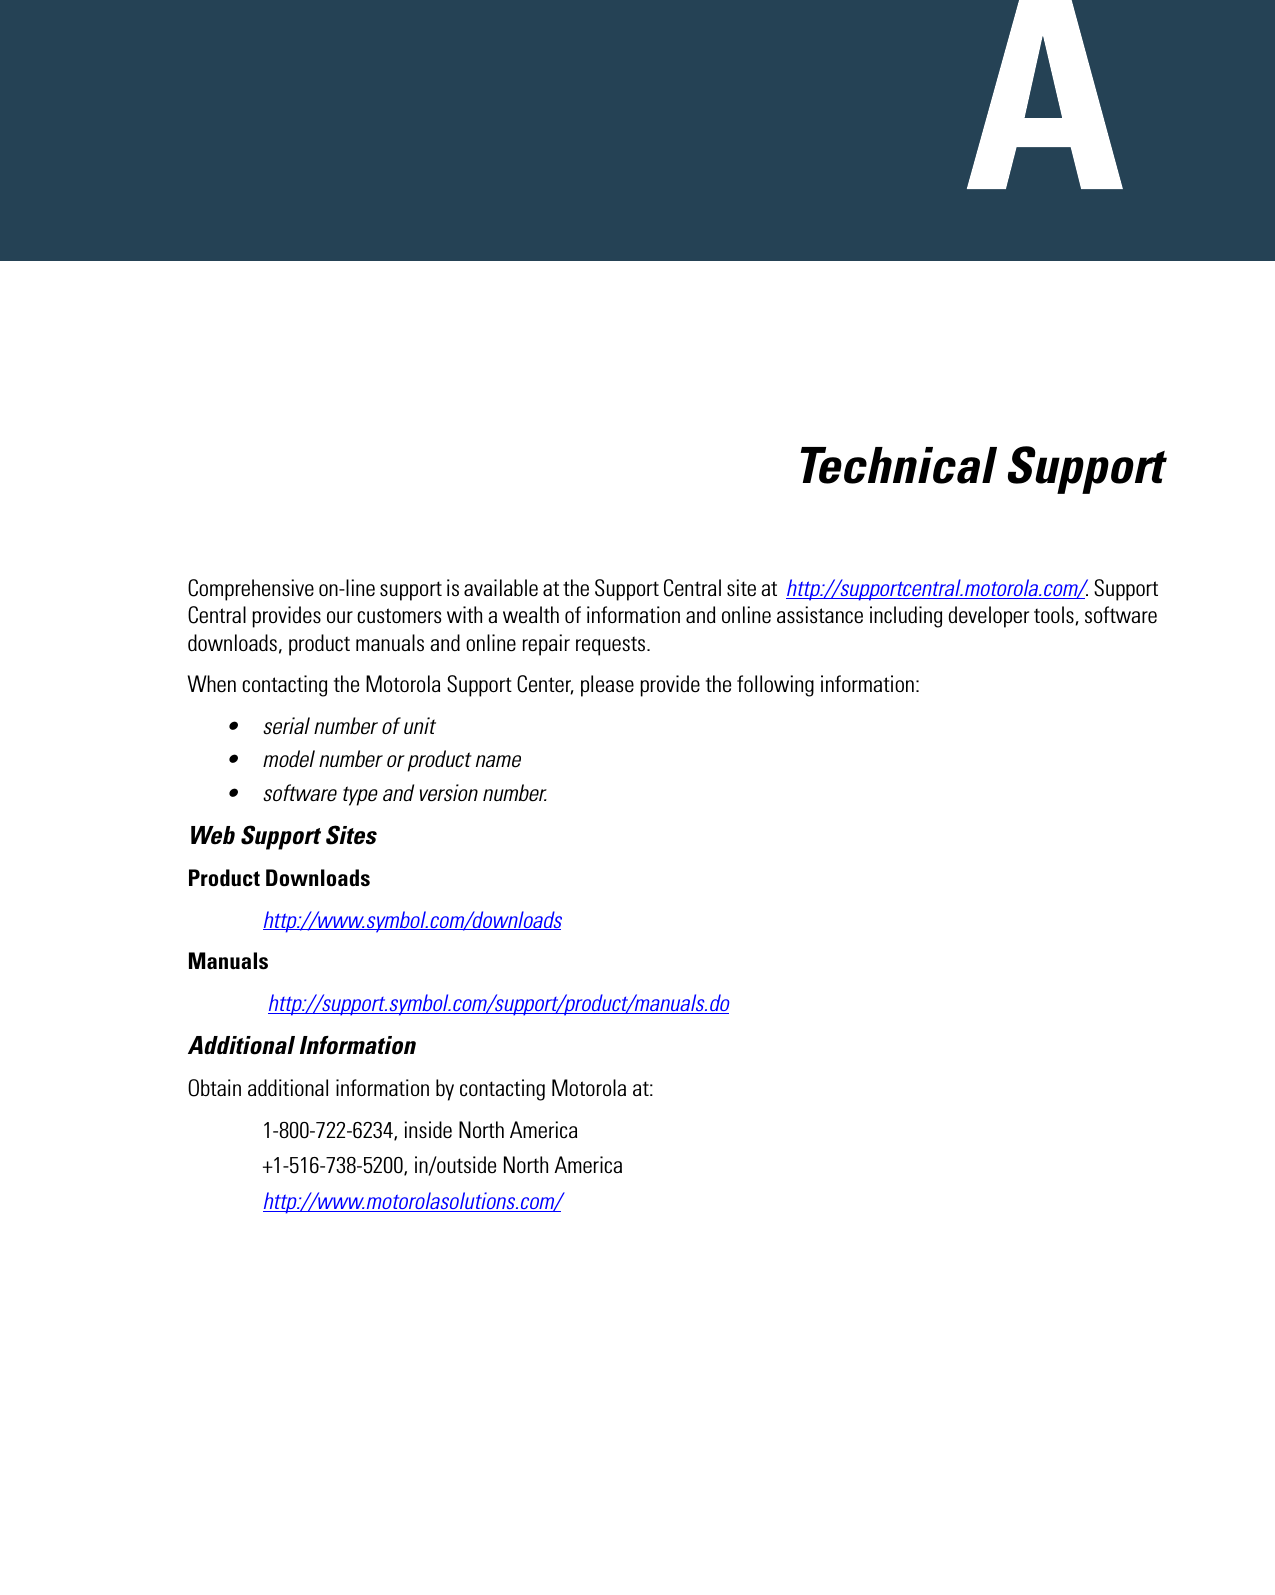   Technical SupportComprehensive on-line support is available at the Support Central site at  http://supportcentral.motorola.com/. Support Central provides our customers with a wealth of information and online assistance including developer tools, software downloads, product manuals and online repair requests.When contacting the Motorola Support Center, please provide the following information:• serial number of unit• model number or product name• software type and version number.Web Support SitesProduct Downloadshttp://www.symbol.com/downloadsManuals http://support.symbol.com/support/product/manuals.doAdditional InformationObtain additional information by contacting Motorola at:1-800-722-6234, inside North America+1-516-738-5200, in/outside North Americahttp://www.motorolasolutions.com/